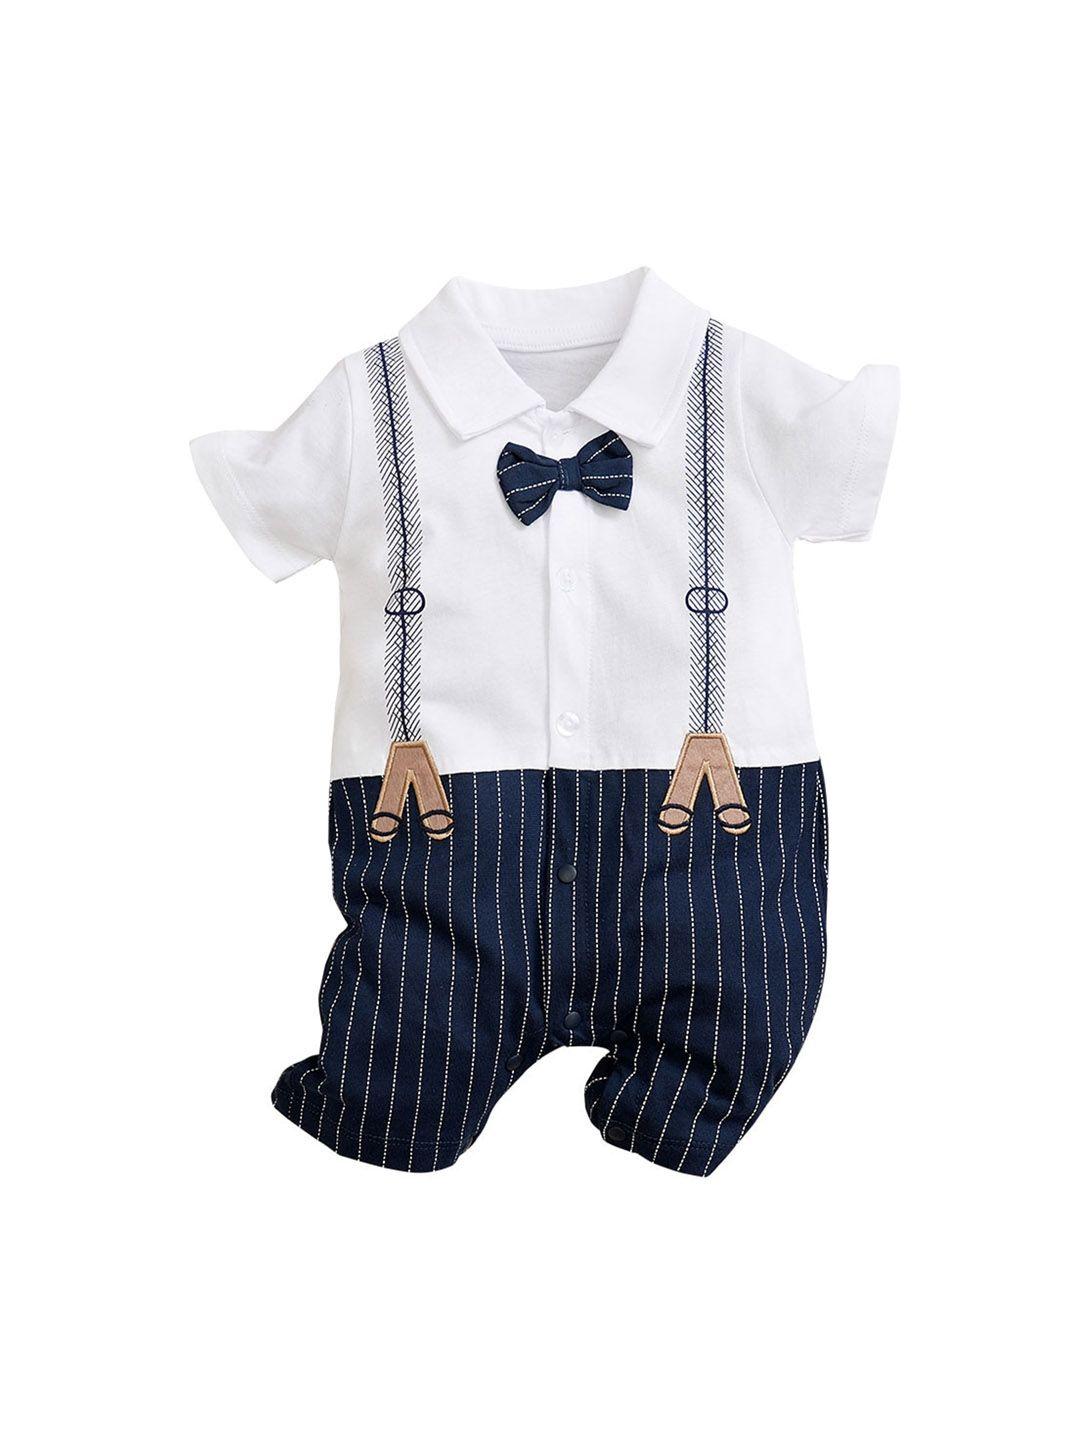 stylecast-infant-boys-white-&-blue-striped-cotton-rompers